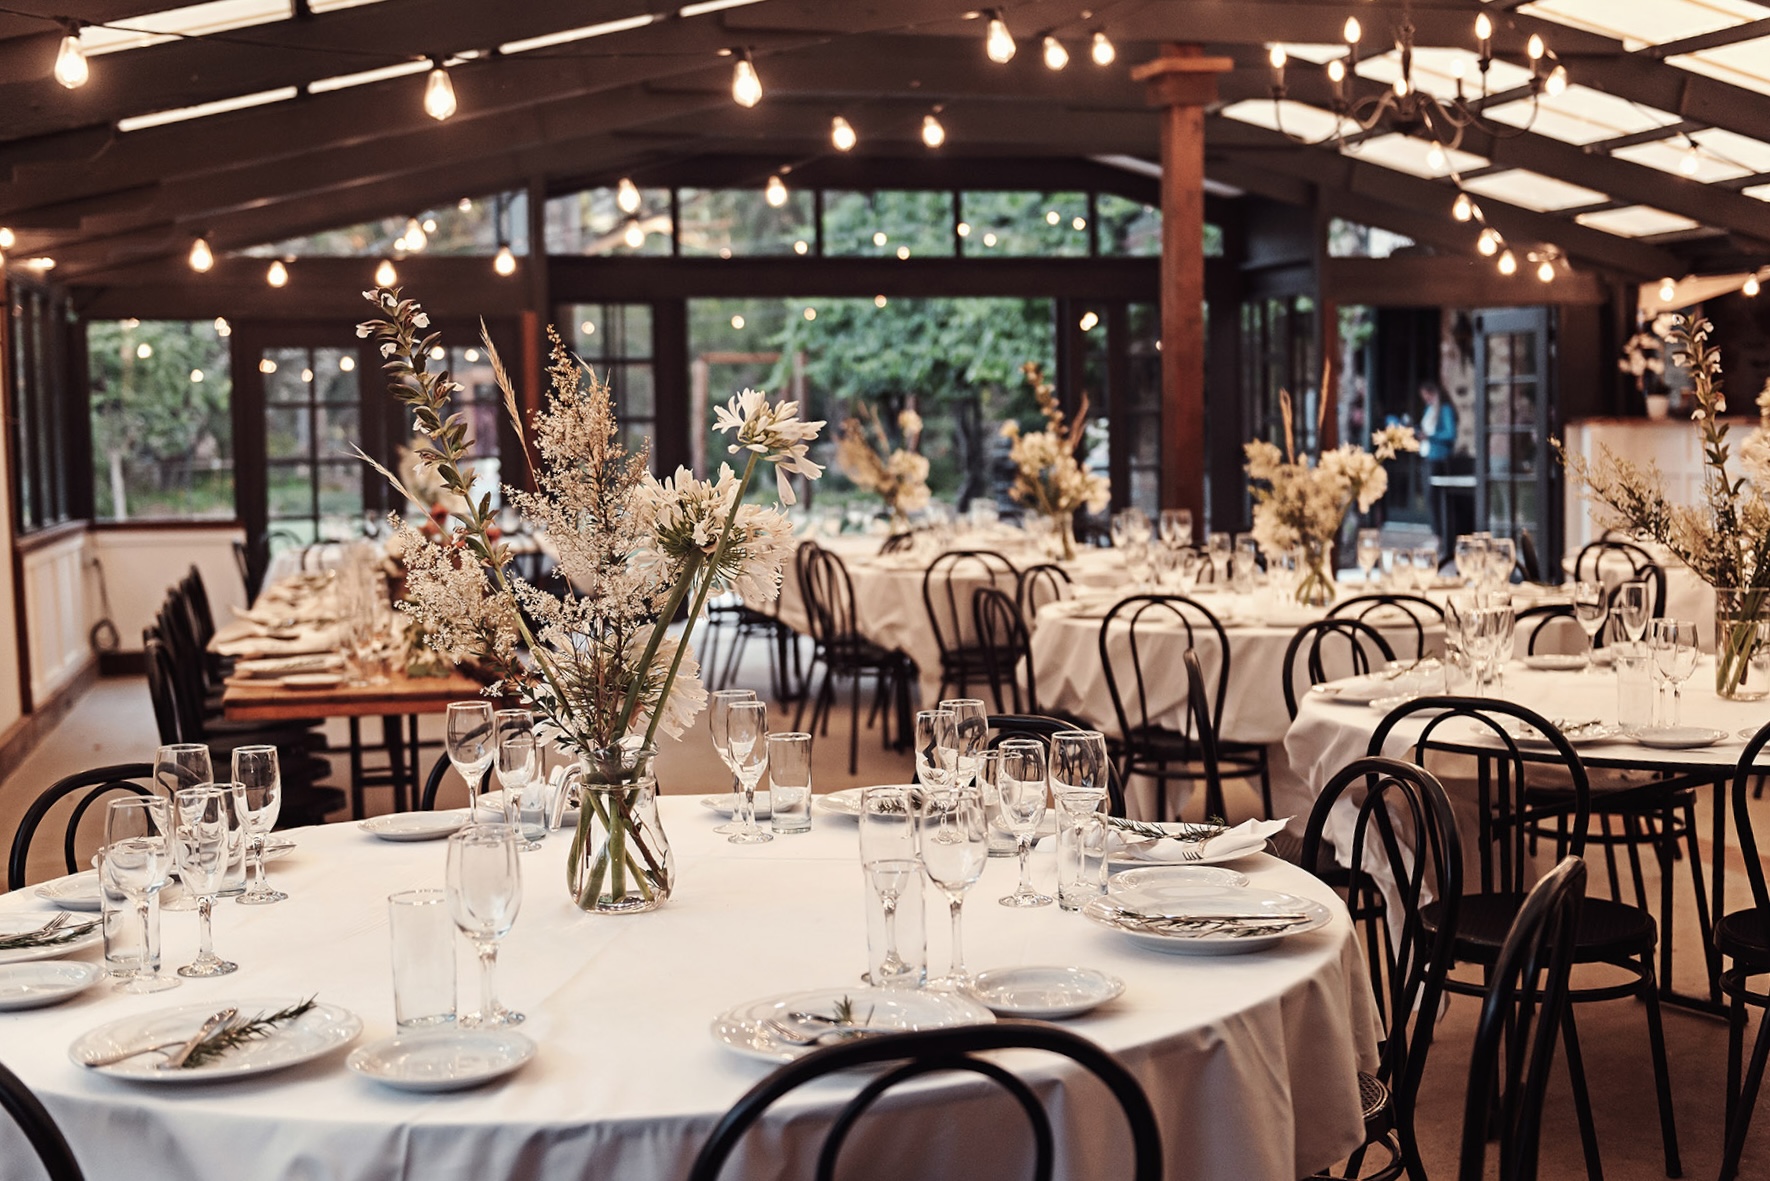 One of the first bespoke Adelaide Hills wedding venues, Hazelmere Homestead is a private estate with 3 acres of stunning gardens which surround their magnificent heritage homestead, pavilion events space and boutique accommodation.